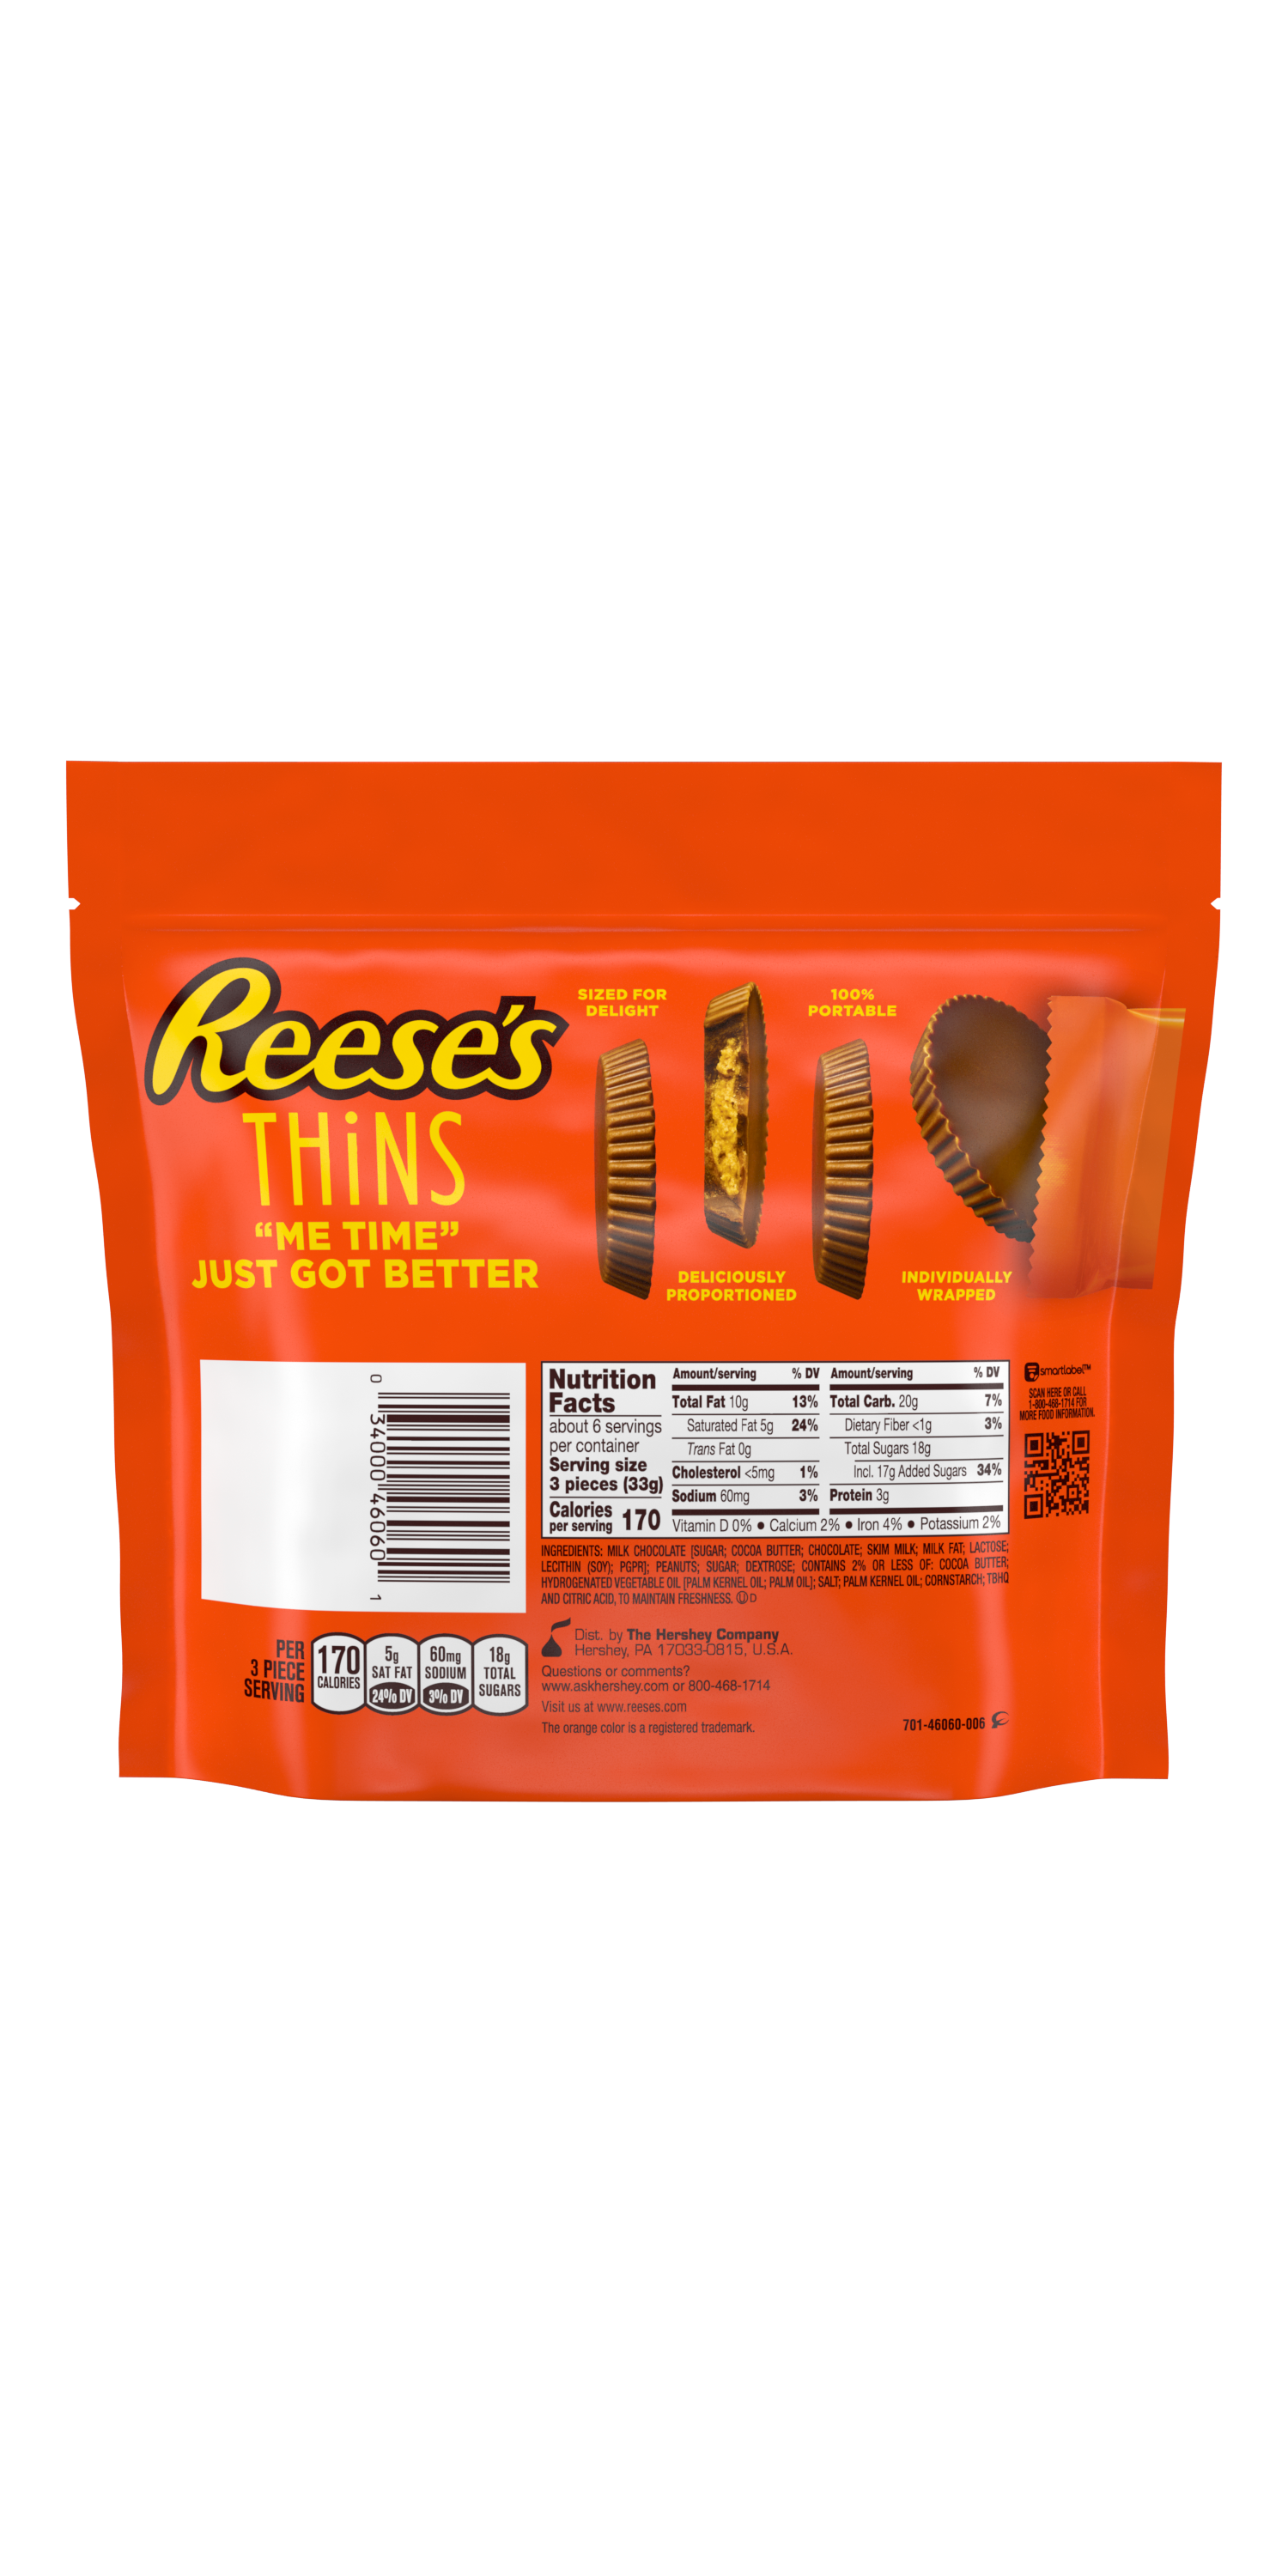 REESE'S THiNS Milk Chocolate Peanut Butter Cups, 7.37 oz pack - Back of Package